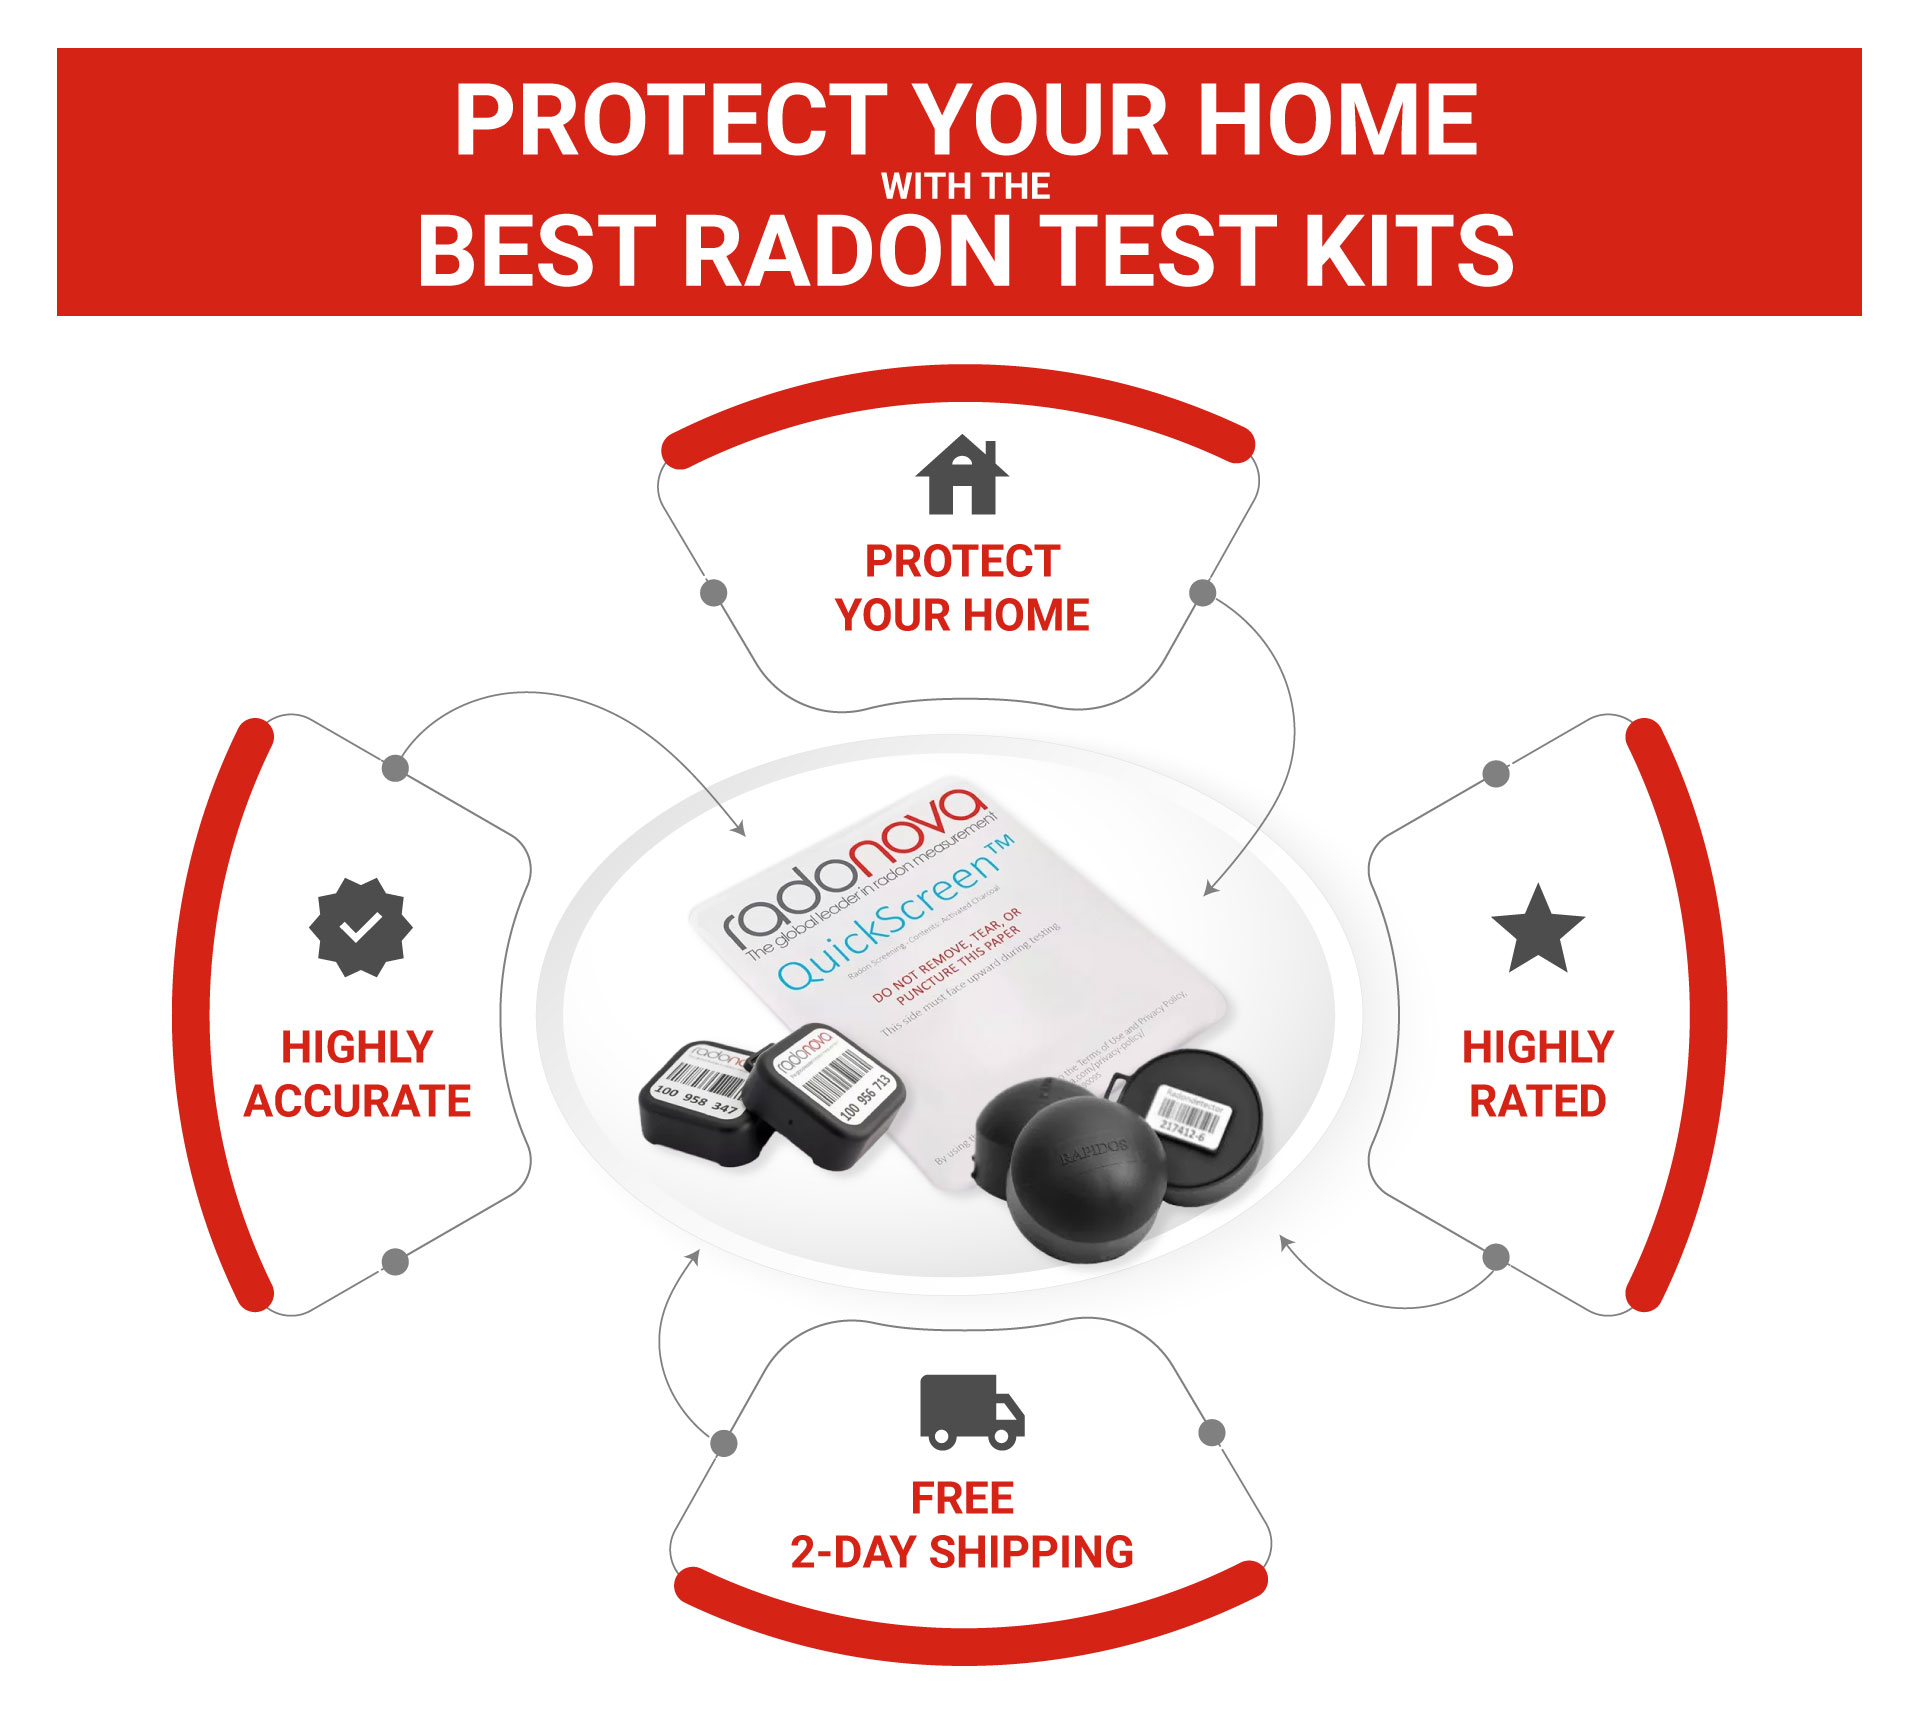 The most TRUSTED, AWARDED and LOVED radon detectors on the market